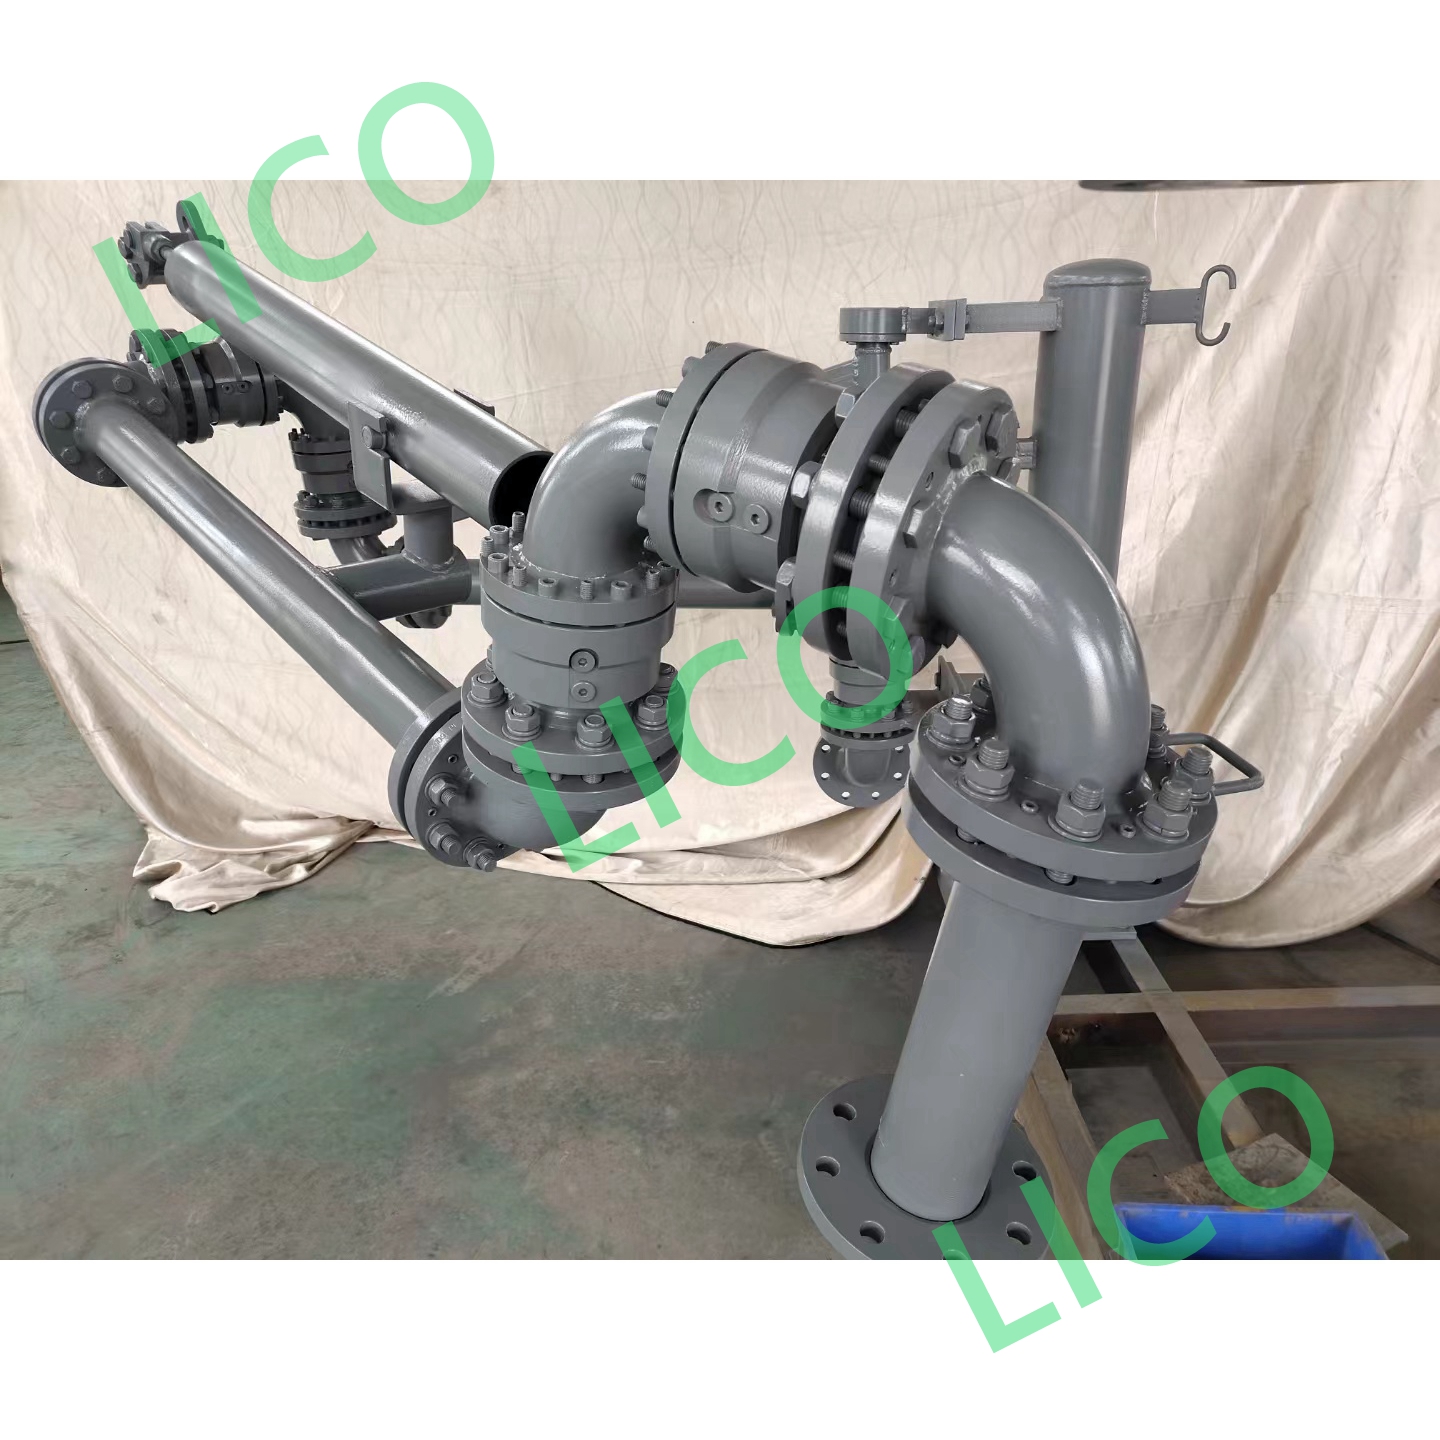 PTFE Lined Drop Pipe Loading Arm with Swivel Joint